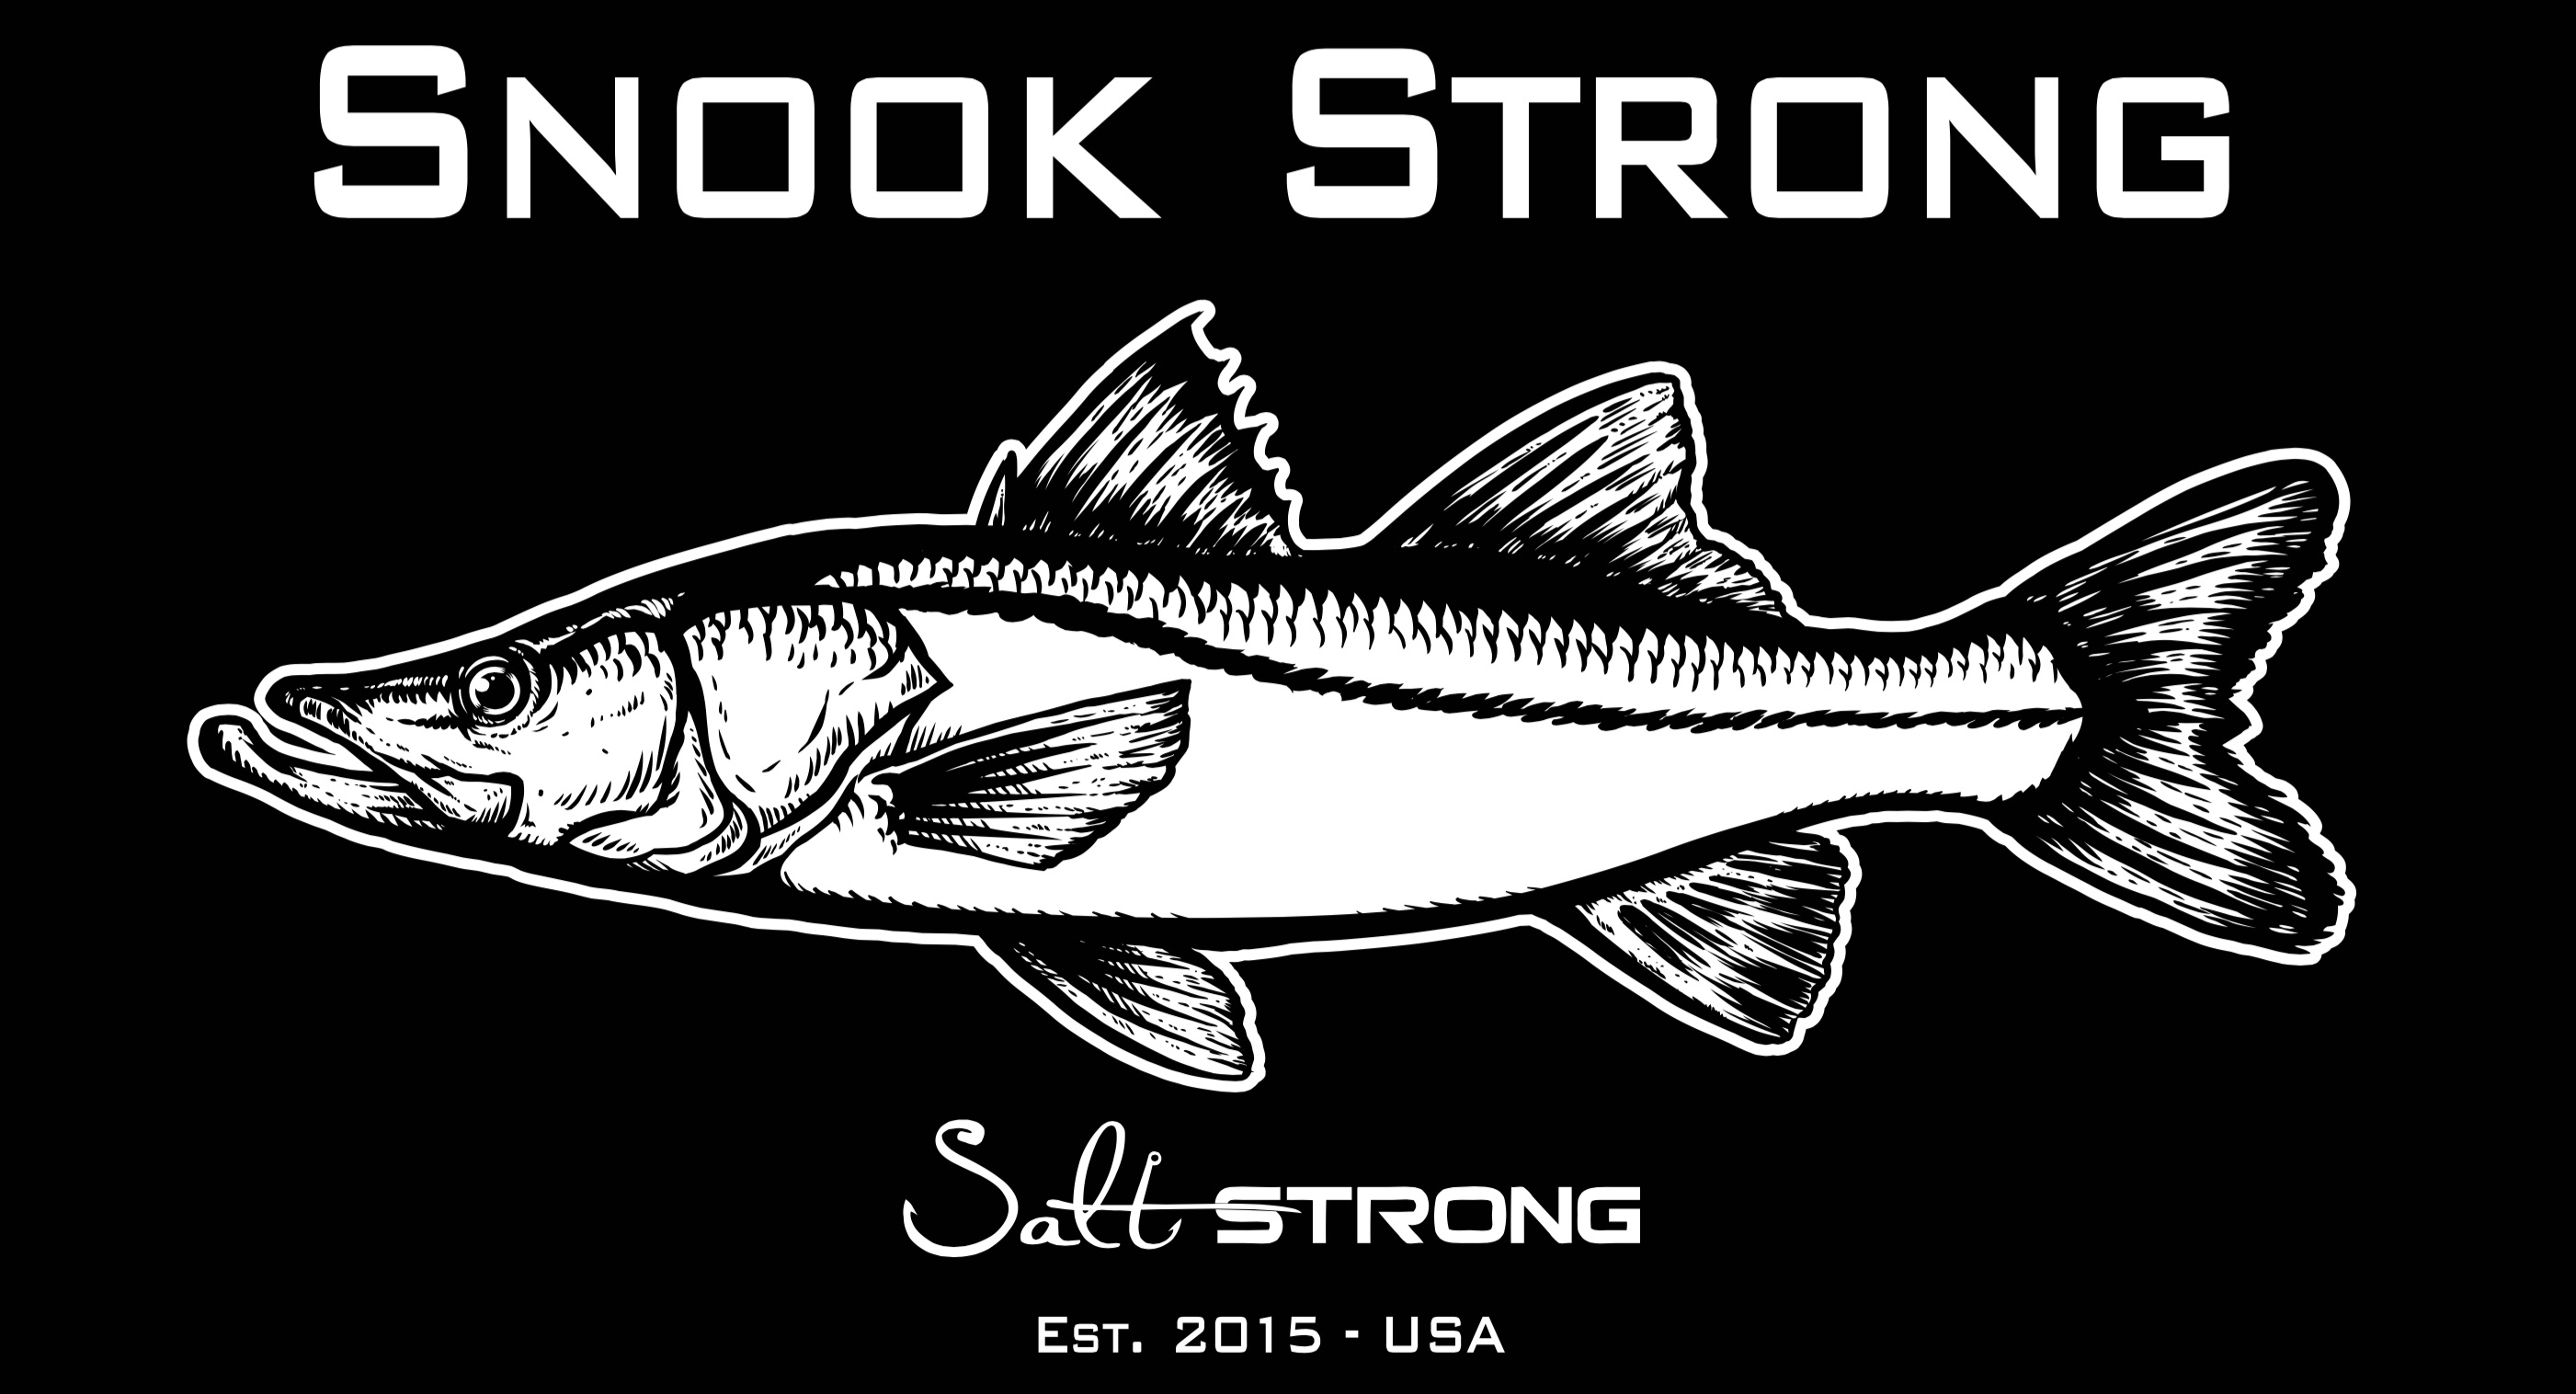 http://snook%20strong